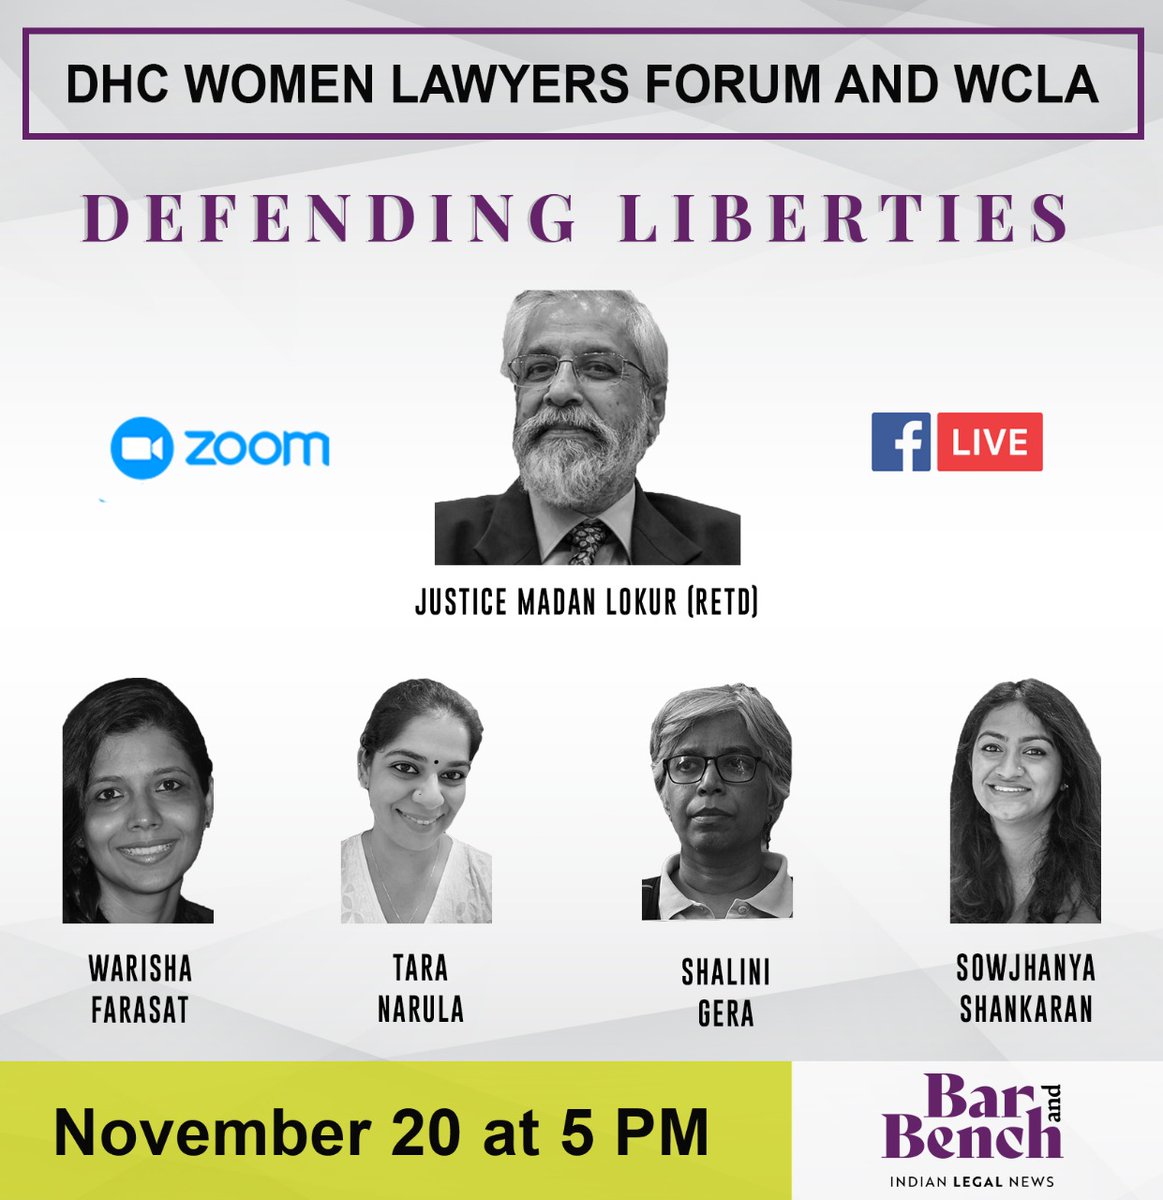 Justice (retd.) Madan Lokur to shortly speak on the theme "Defending Liberties" in a virtual discussion hosted by the Delhi High Court Women Lawyers Forum and WCLA.Justice (retd.) Lokur will also interact with Warisha Farasat, Tara Narula, Shalini Gera and Sowjhanya Sukumaran.